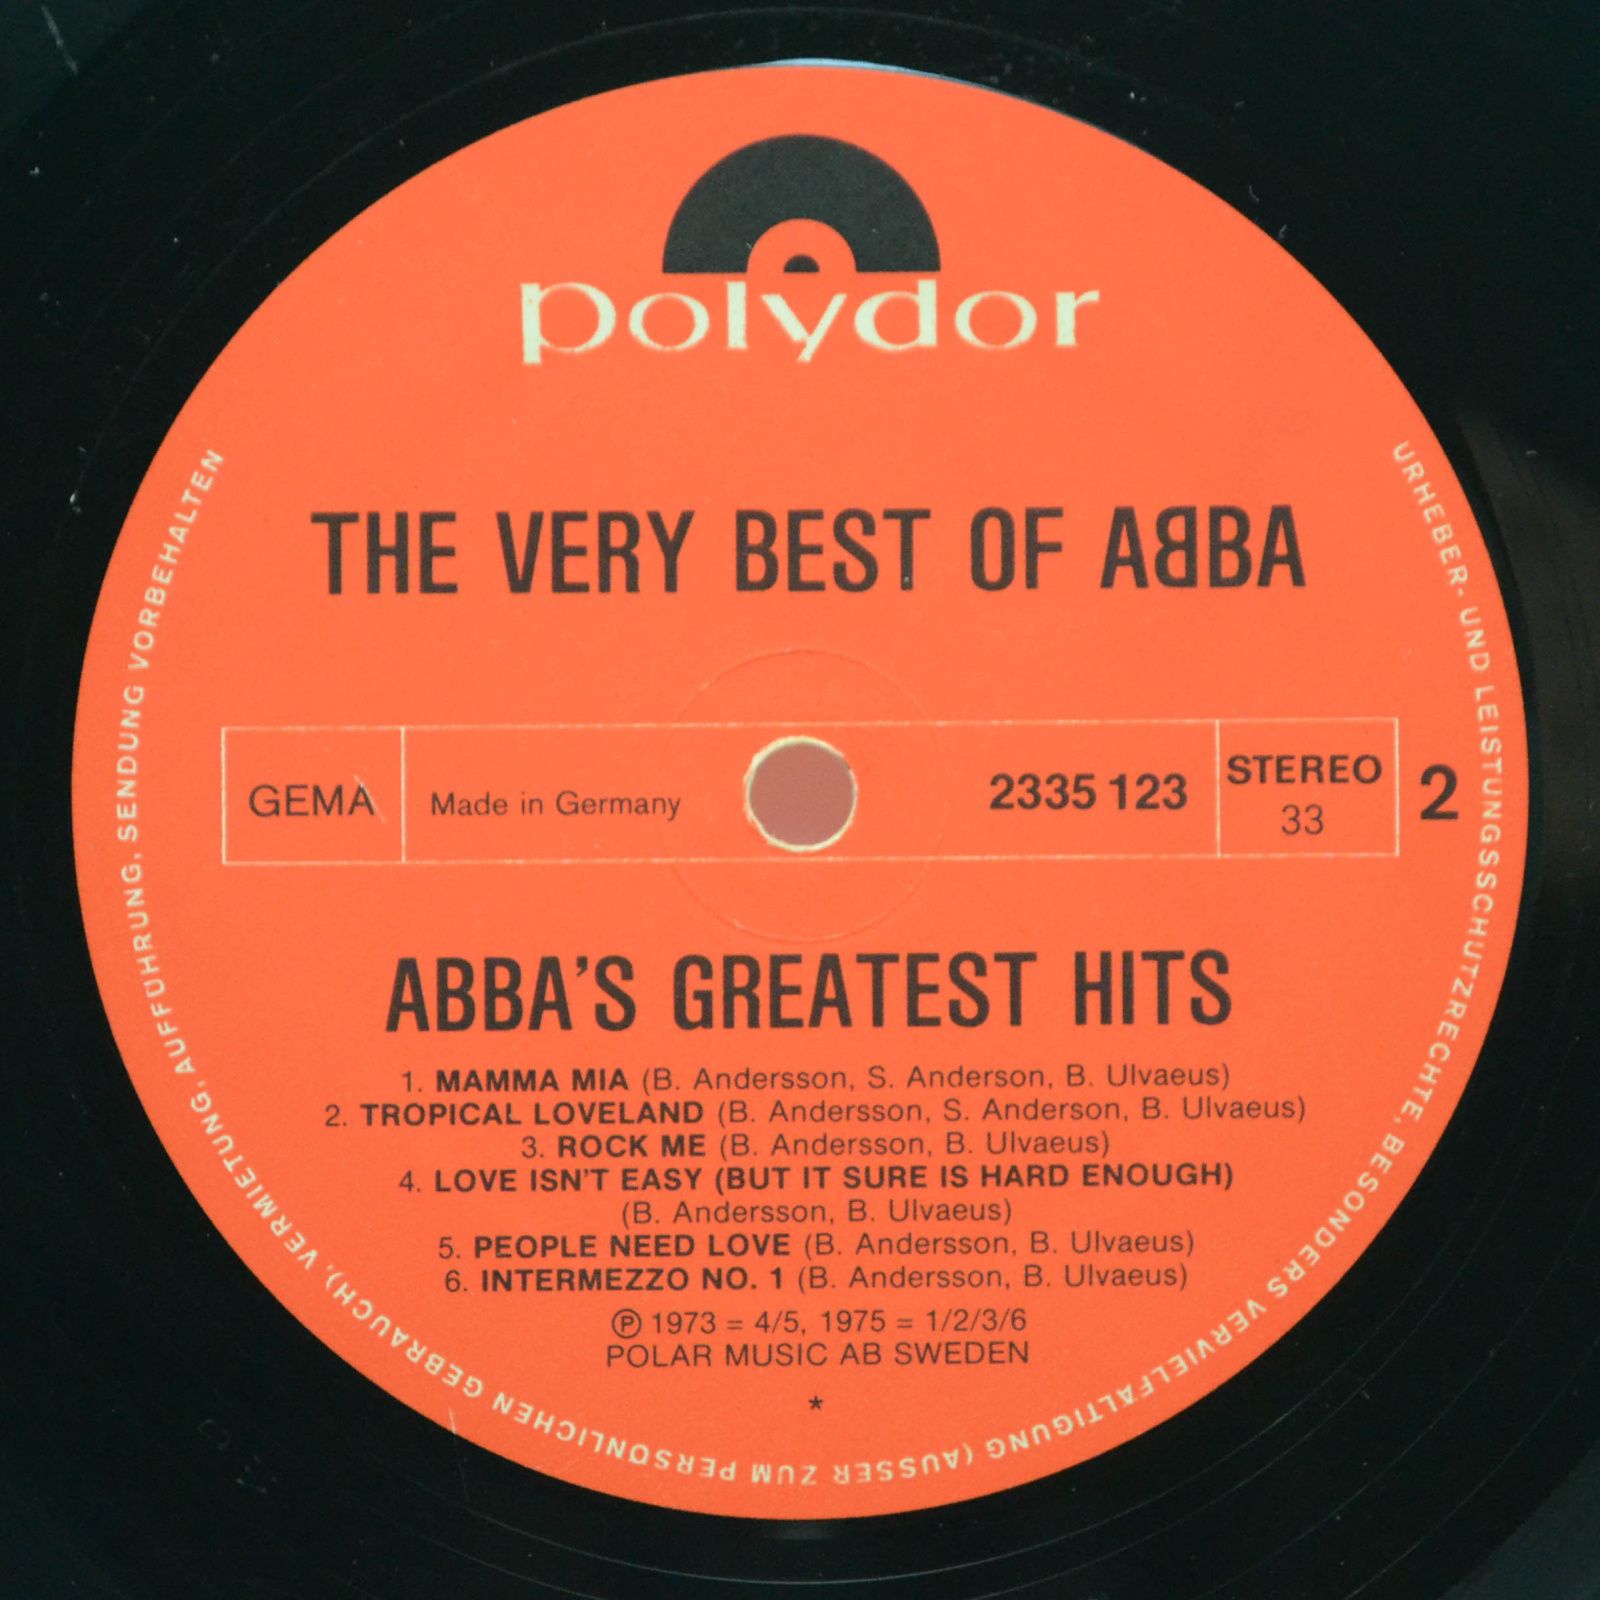 ABBA — The Very Best Of ABBA (ABBA's Greatest Hits) (2LP), 1976